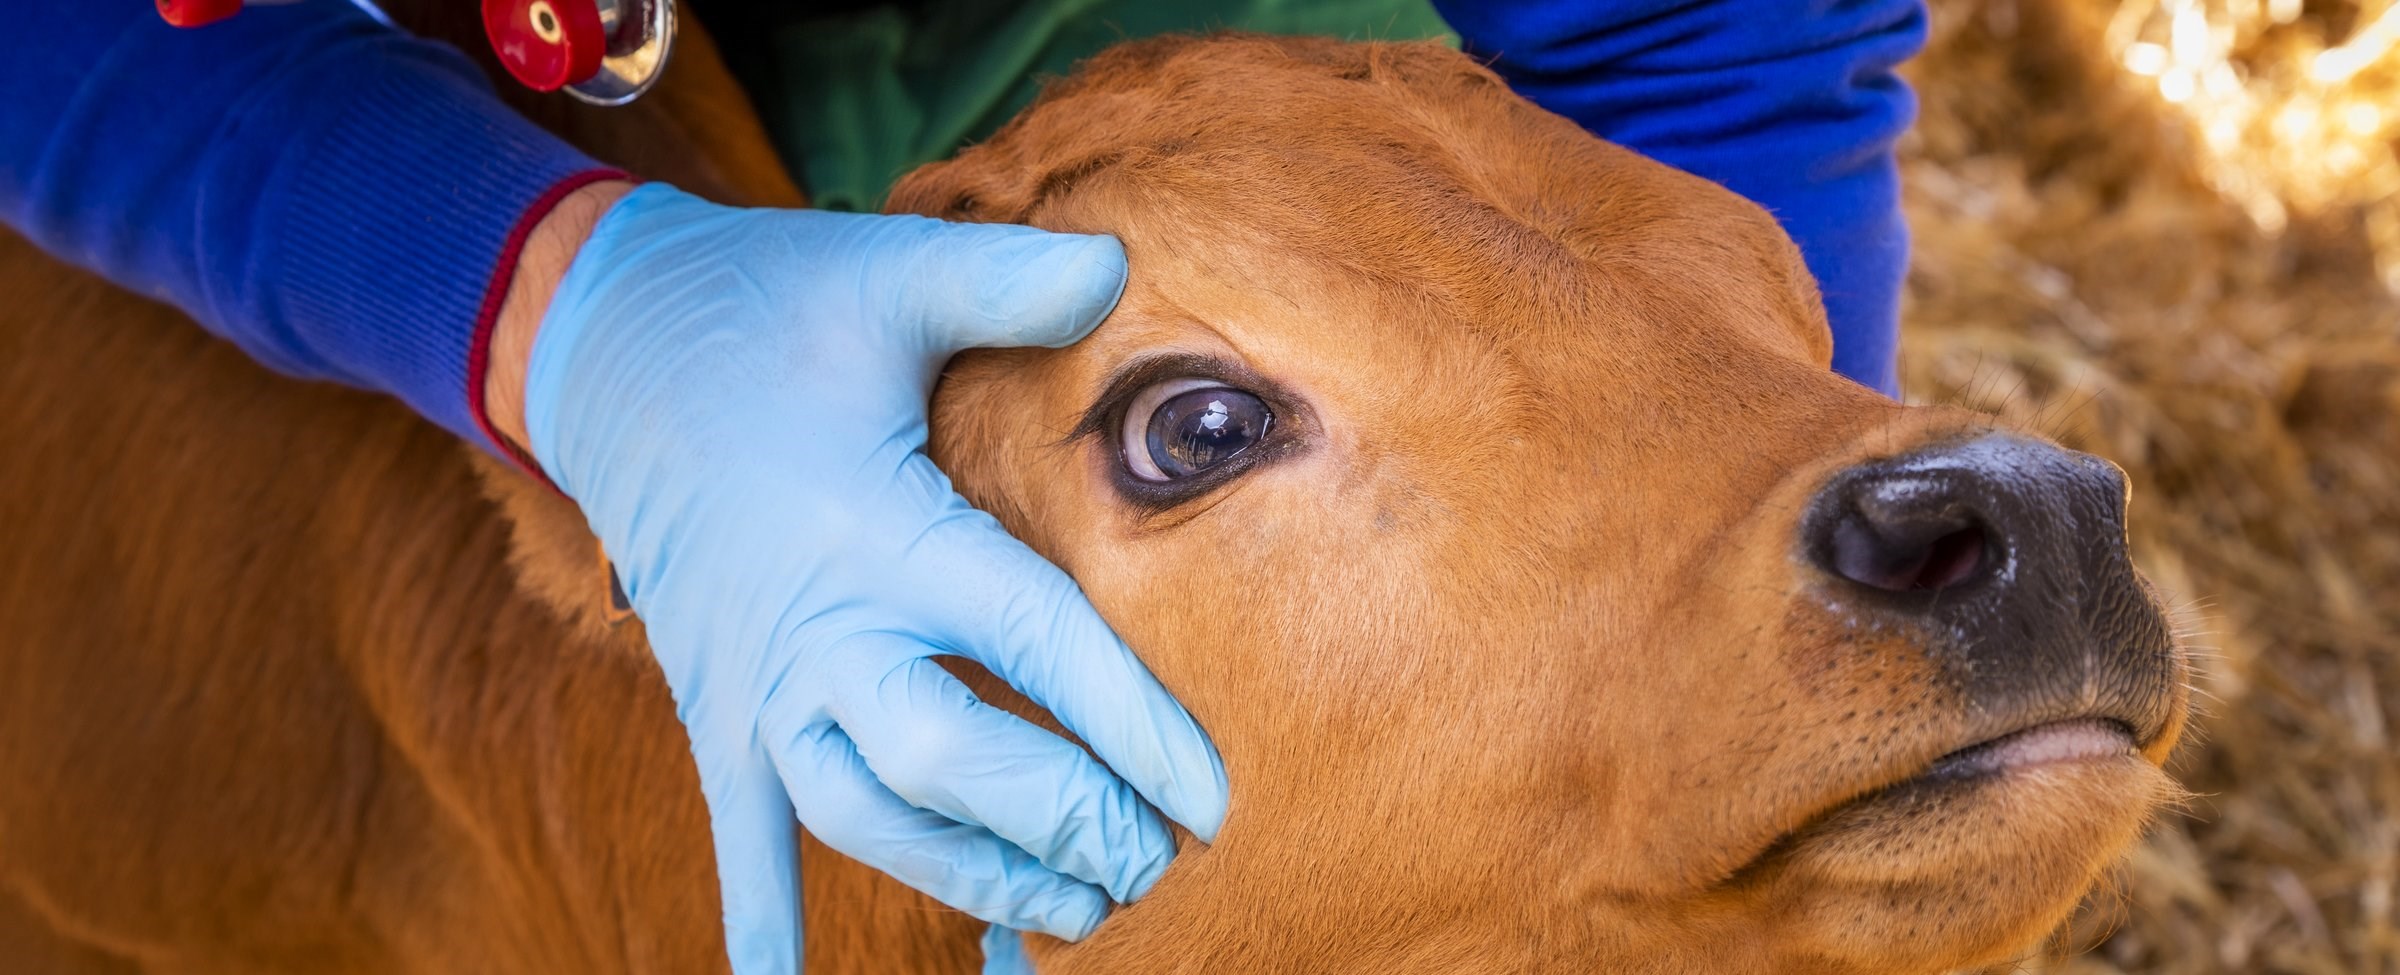 Veterinarian is handling a young calf to evaluate dehydration